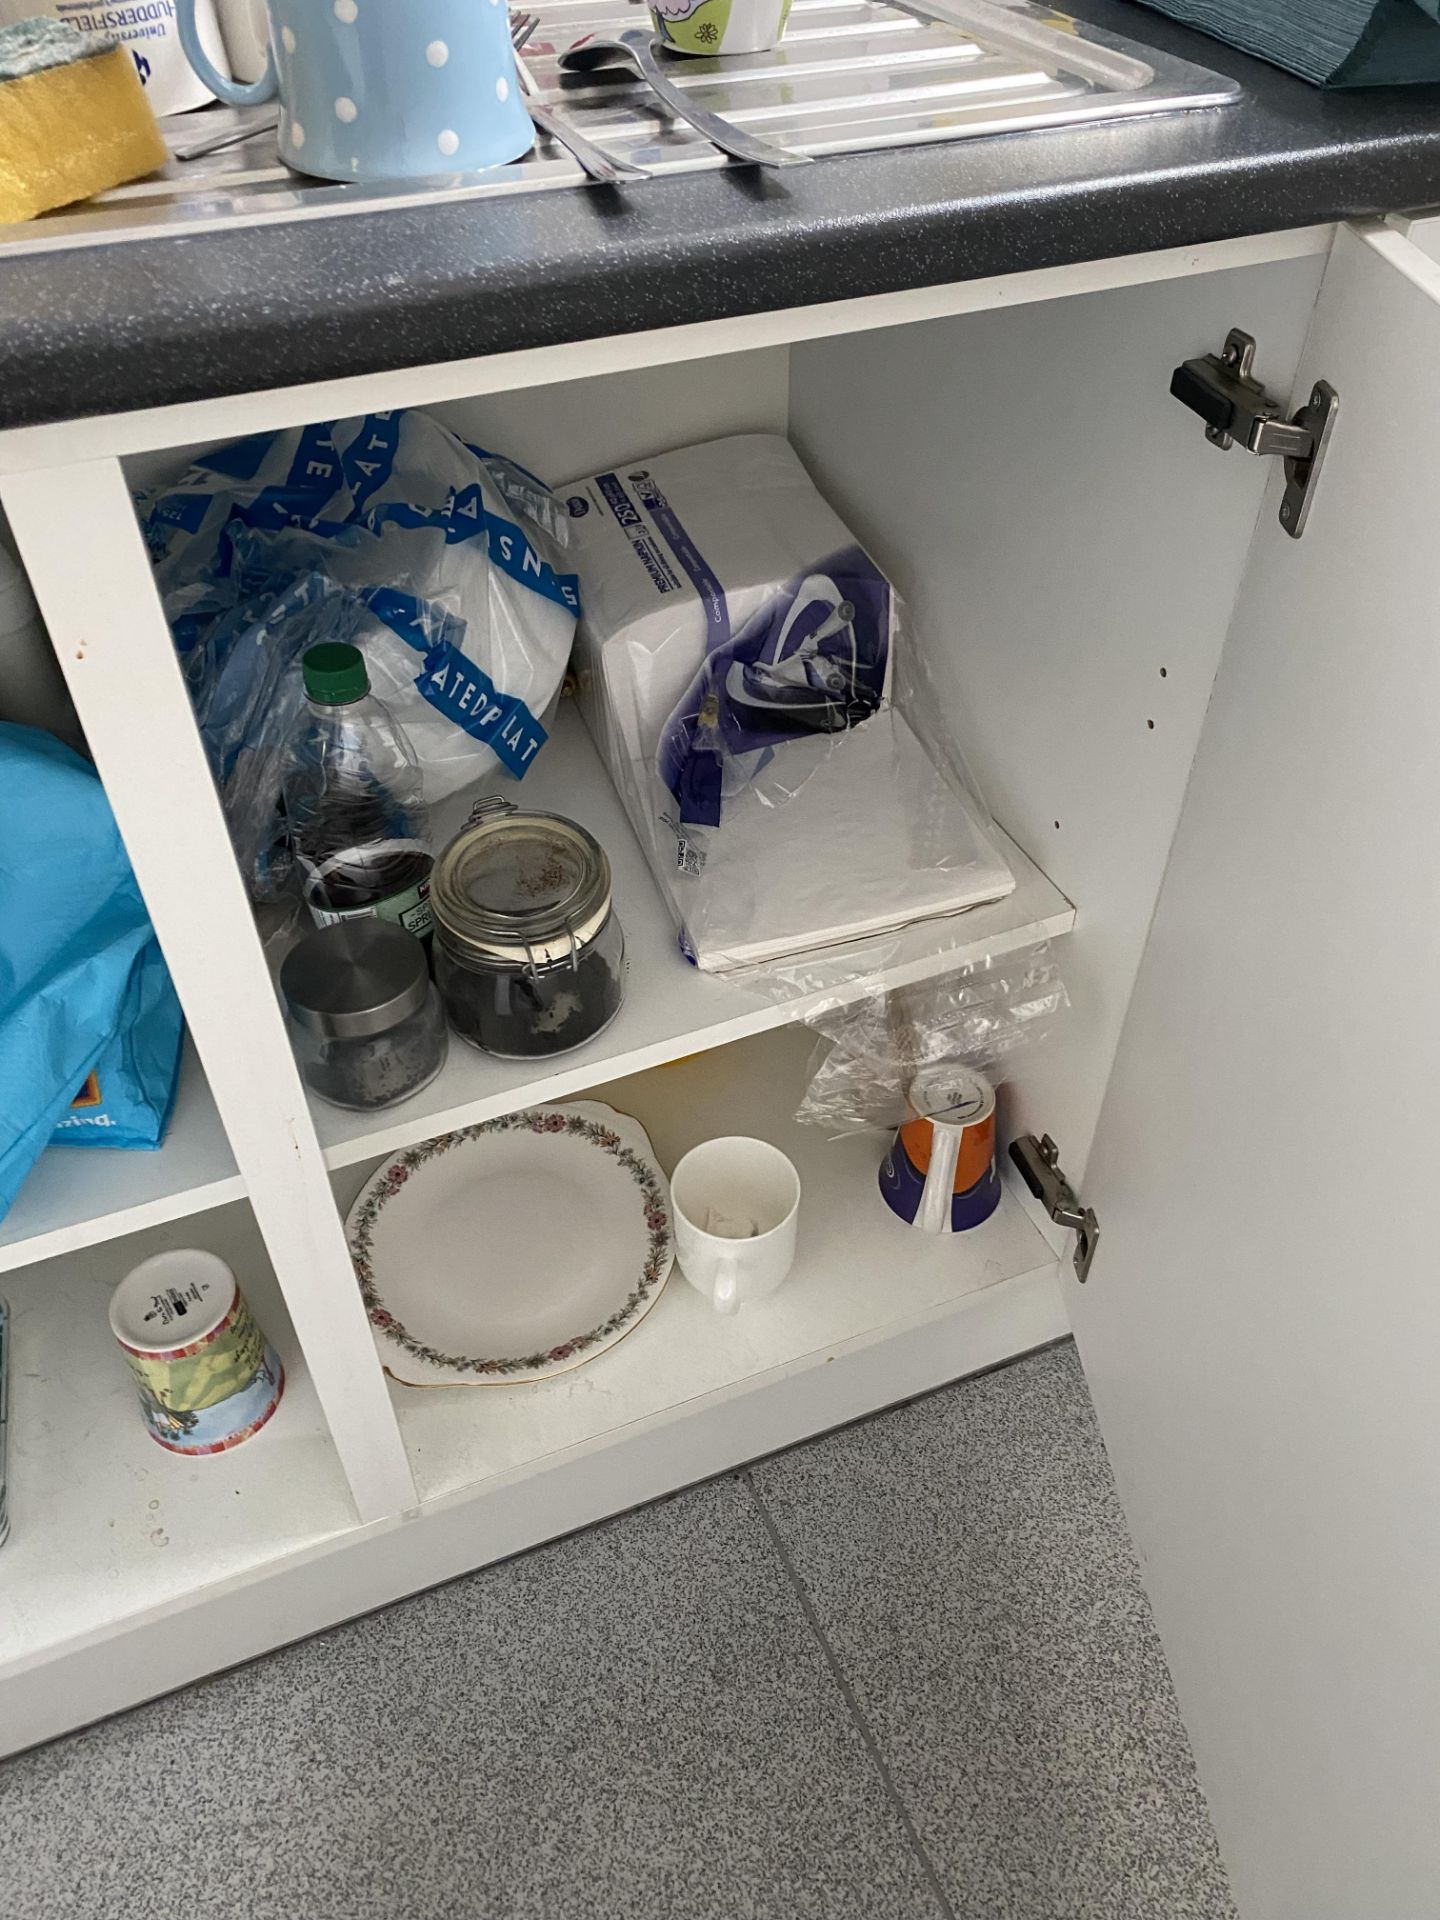 Residual Loose Contents of Room, including refrige